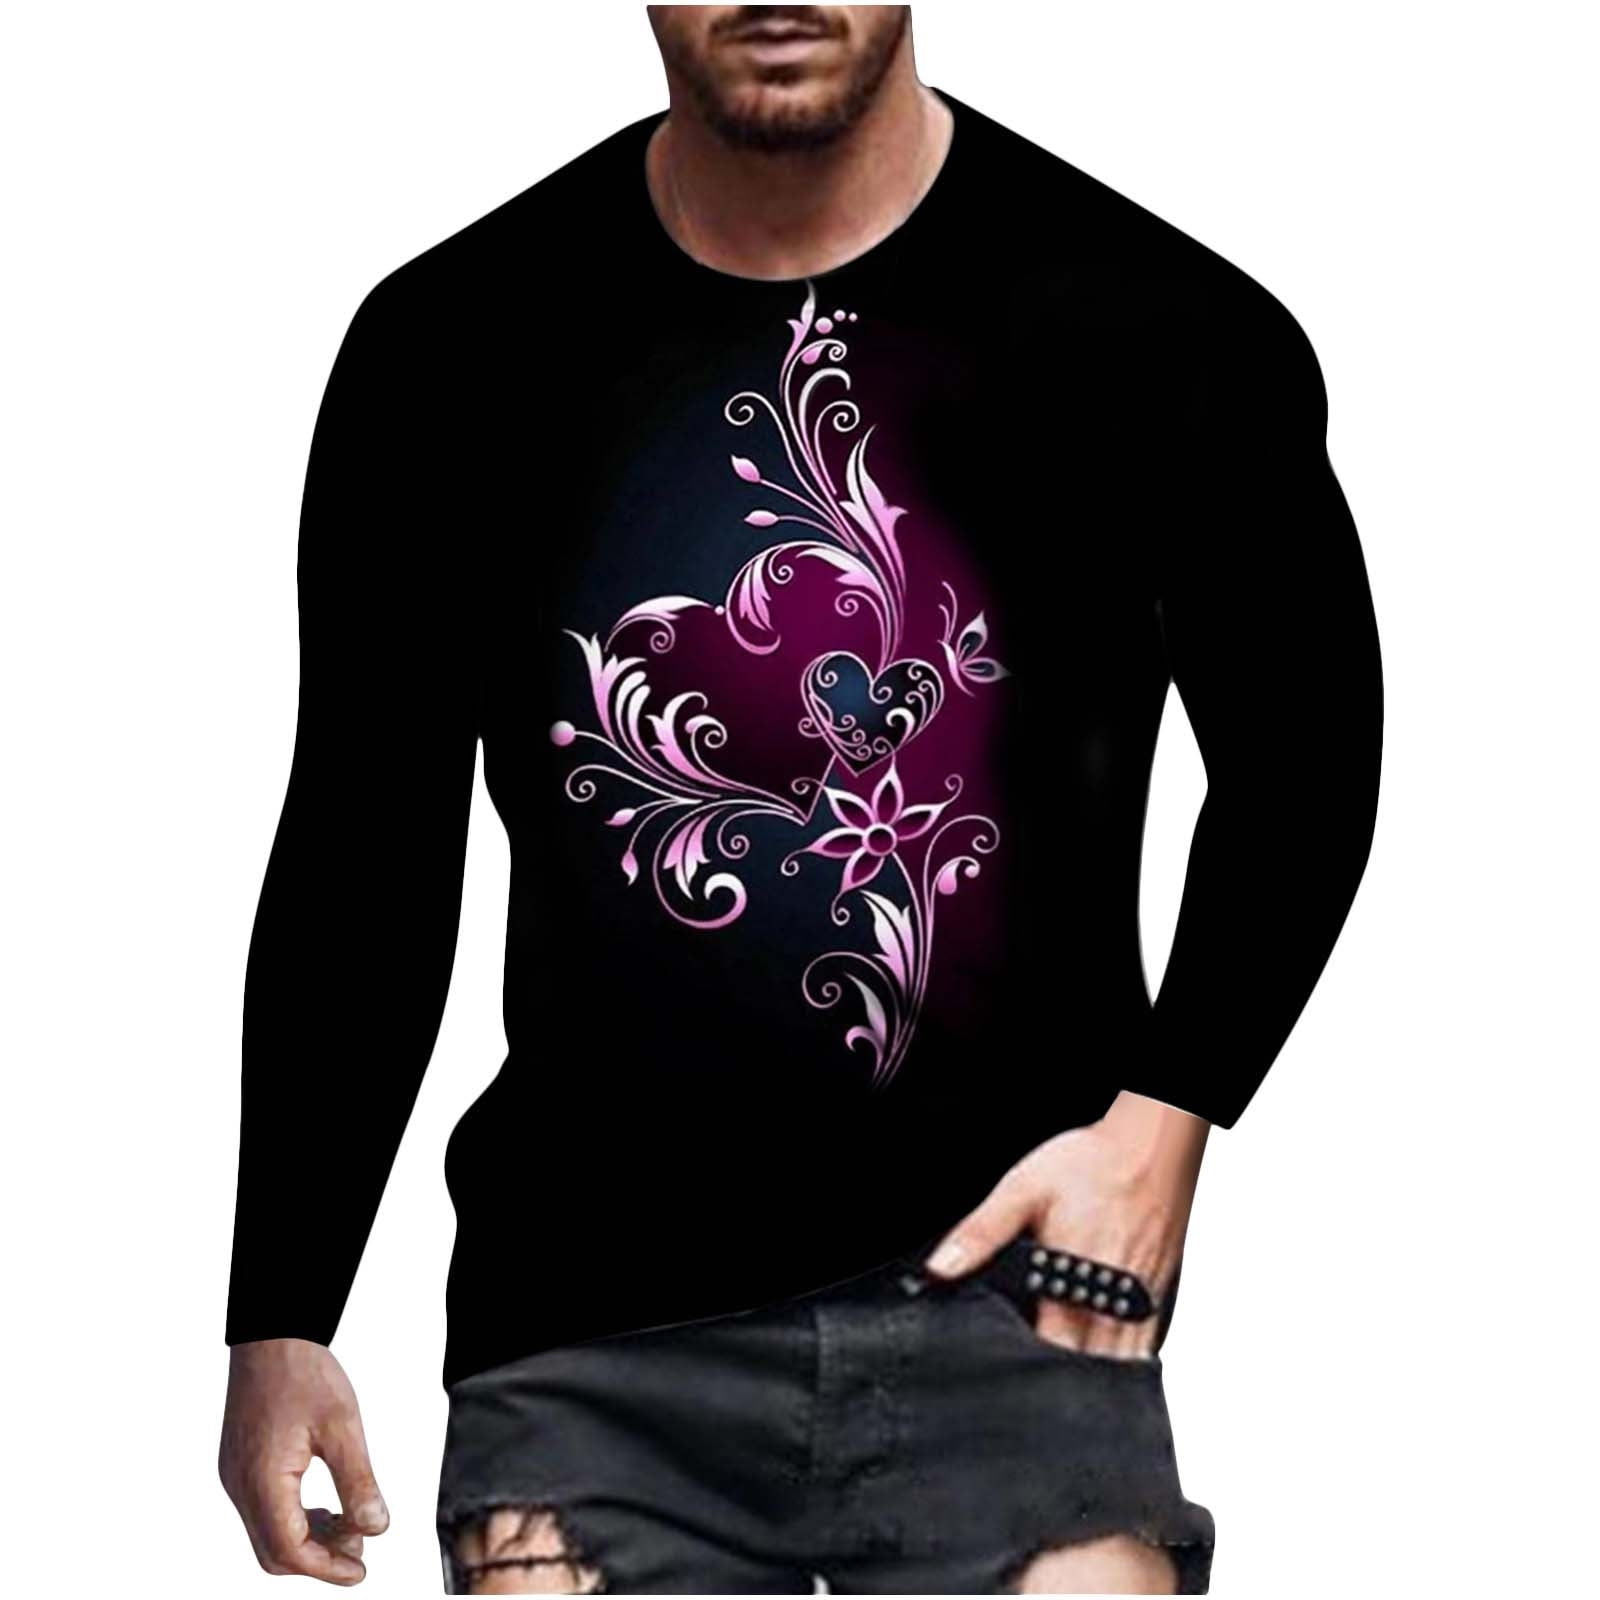 Heat Transfer Letters Printing Round Neck Two Short Sleeved T Shirt Men And  Women Y3 Double Layer Loose Casual T Shirts From Designclothingseller,  $41.99